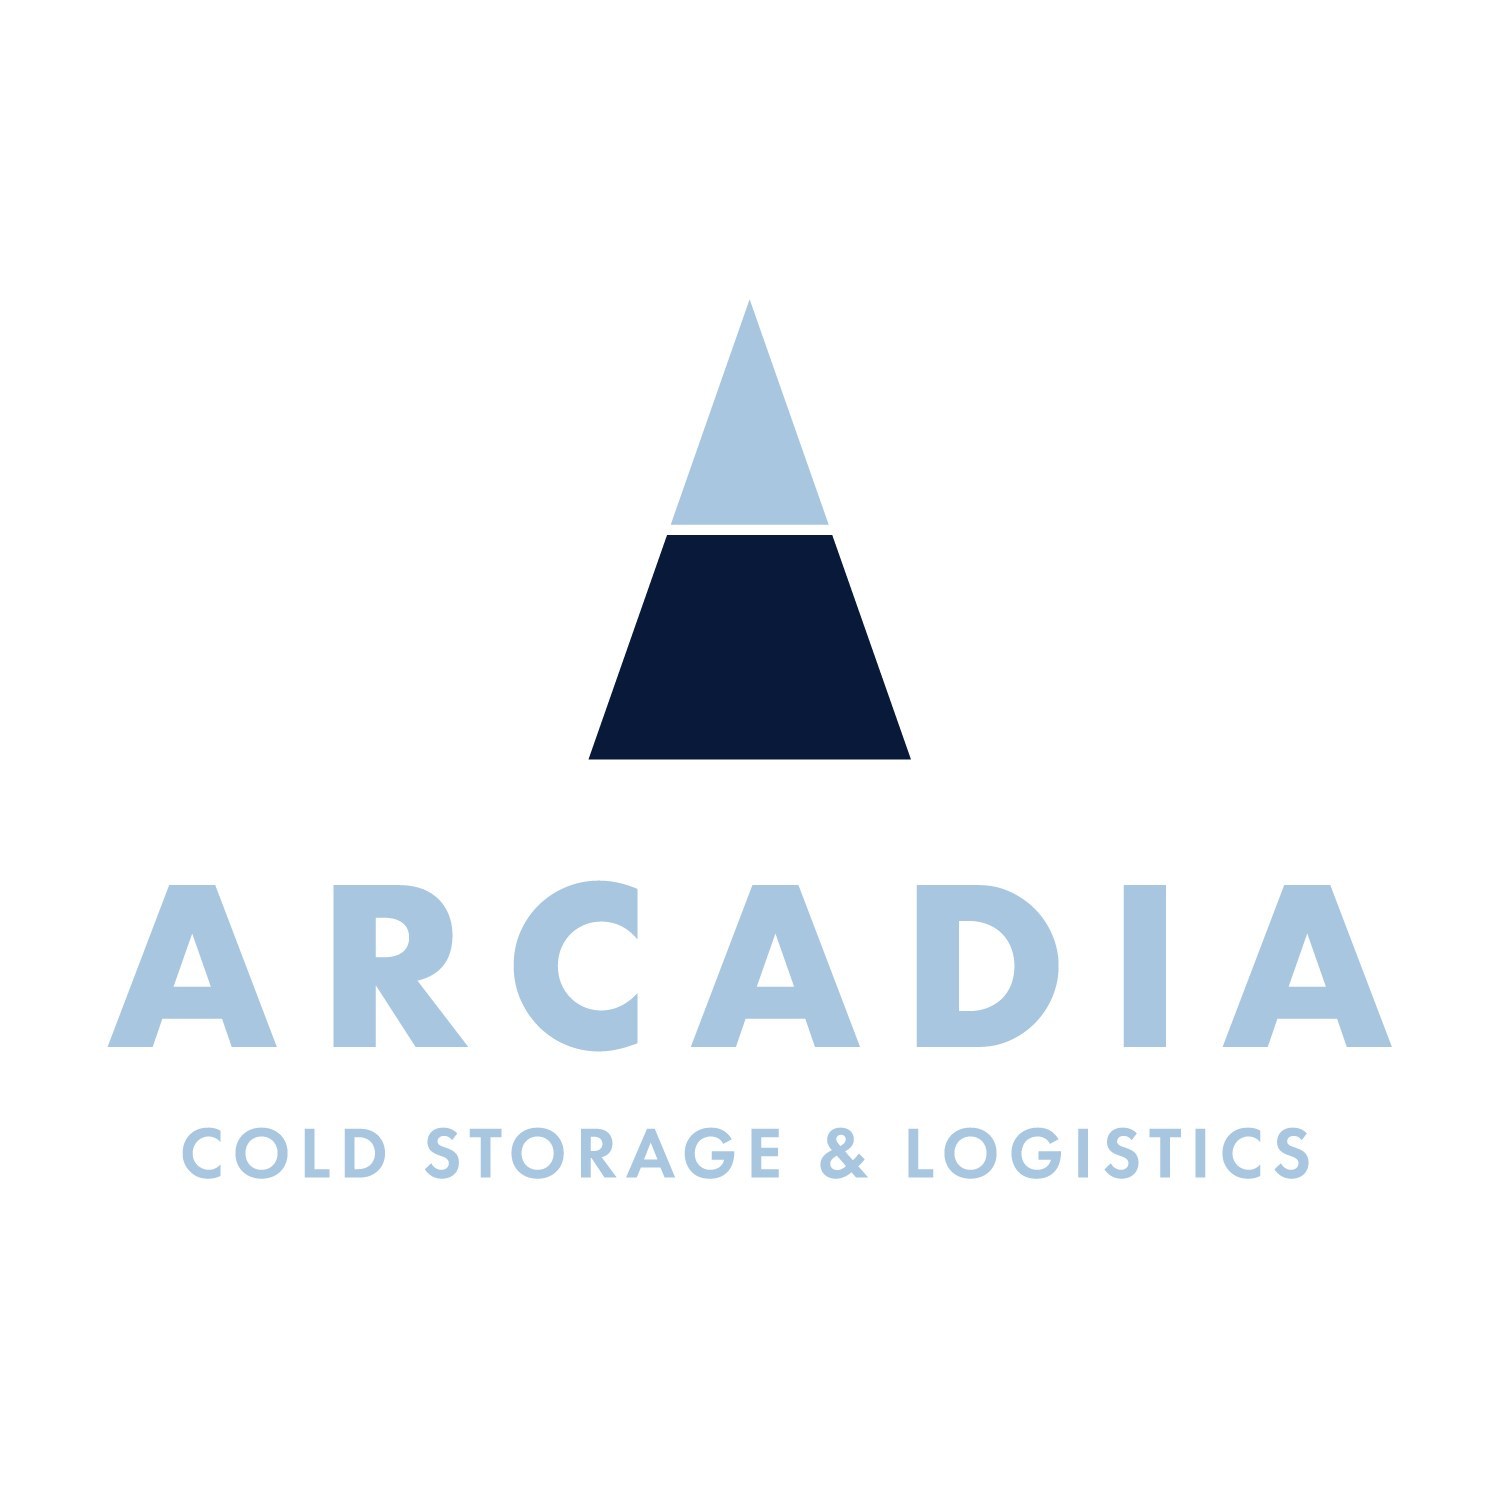 Arcadia Cold was established in April 2021 and specializes in providing third-party handling, storage, distribution and value-added services to the food industry. Arcadia Cold bridges the innovation and supply gaps within the cold industrial industry in the United States through modern cold storage warehouse development expertise and proven operational “know-how”. Its strategic development partnership with Saxum Real Estate offers a collaborative approach to the design-build and operation model (PRNewsfoto/Arcadia Cold)